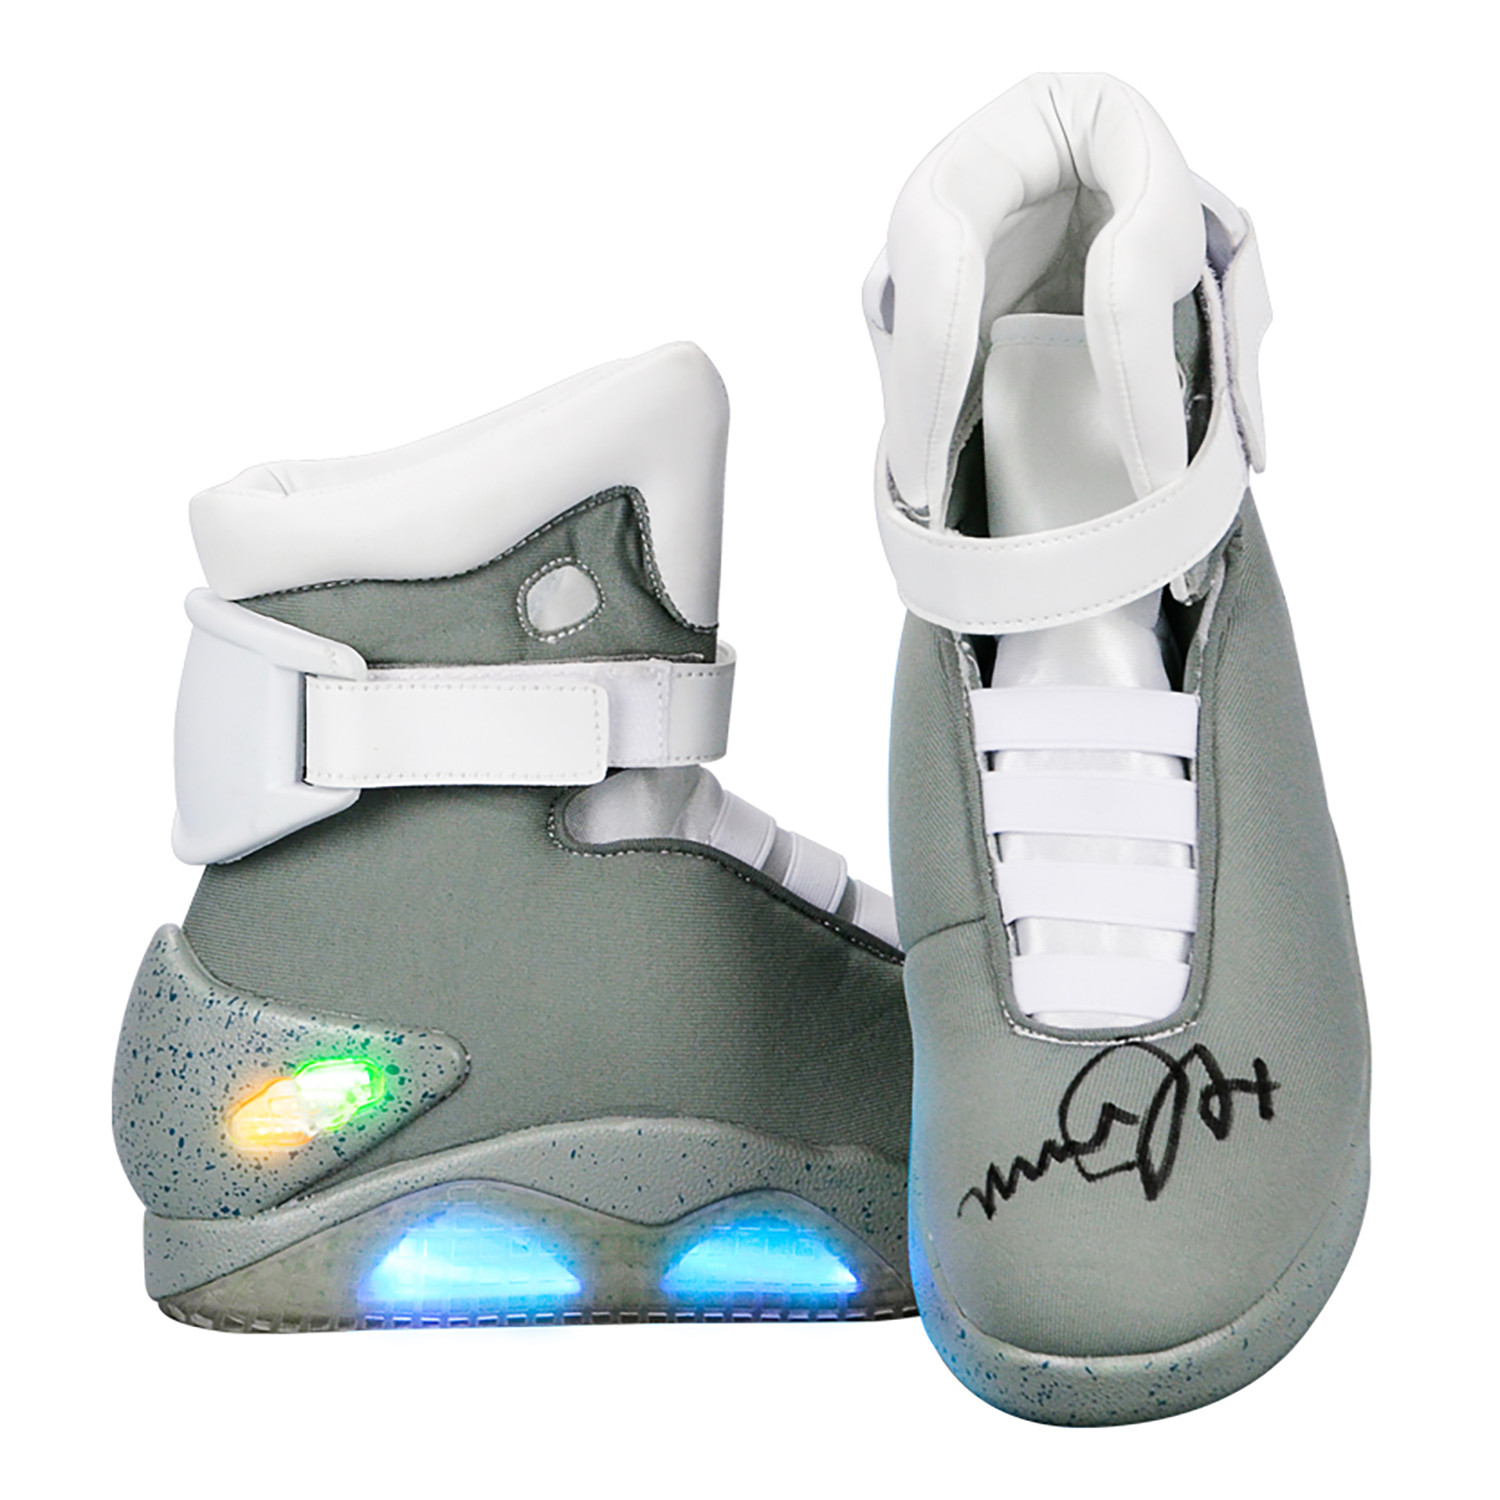 mcfly shoes